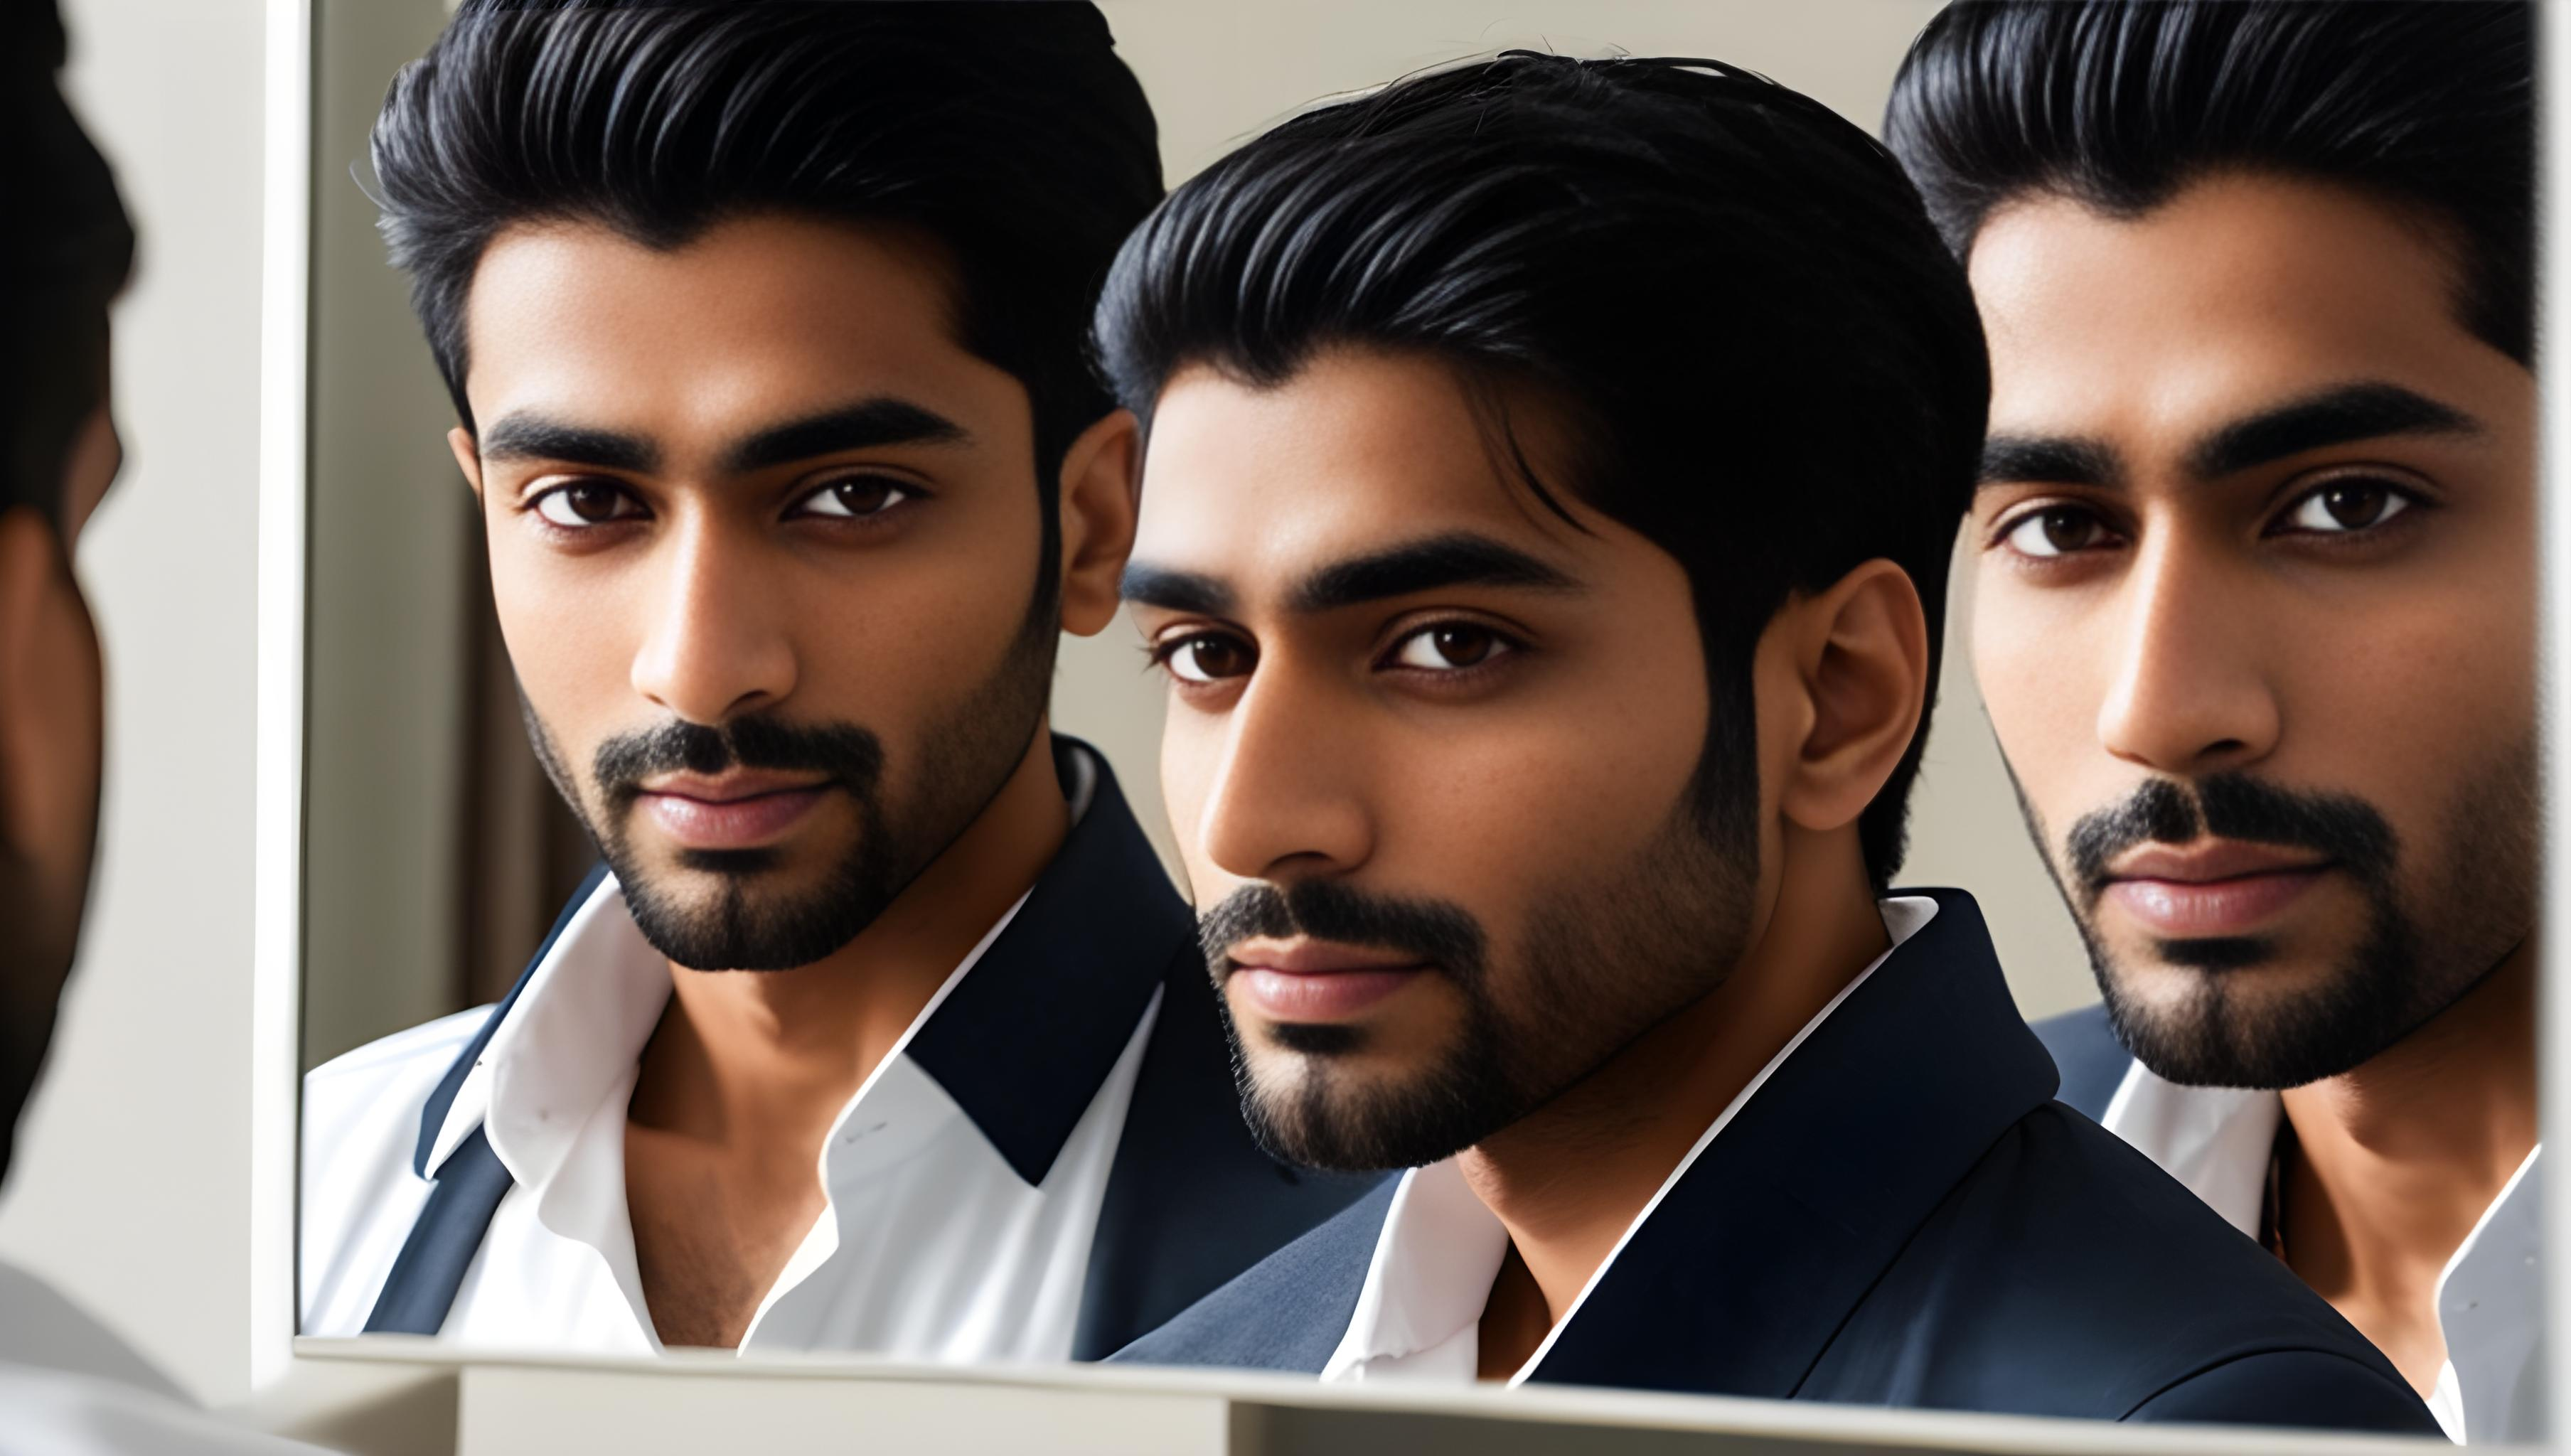 What Makes Indian Men Unattractive? – Low SMV (Blackpill Analysis)